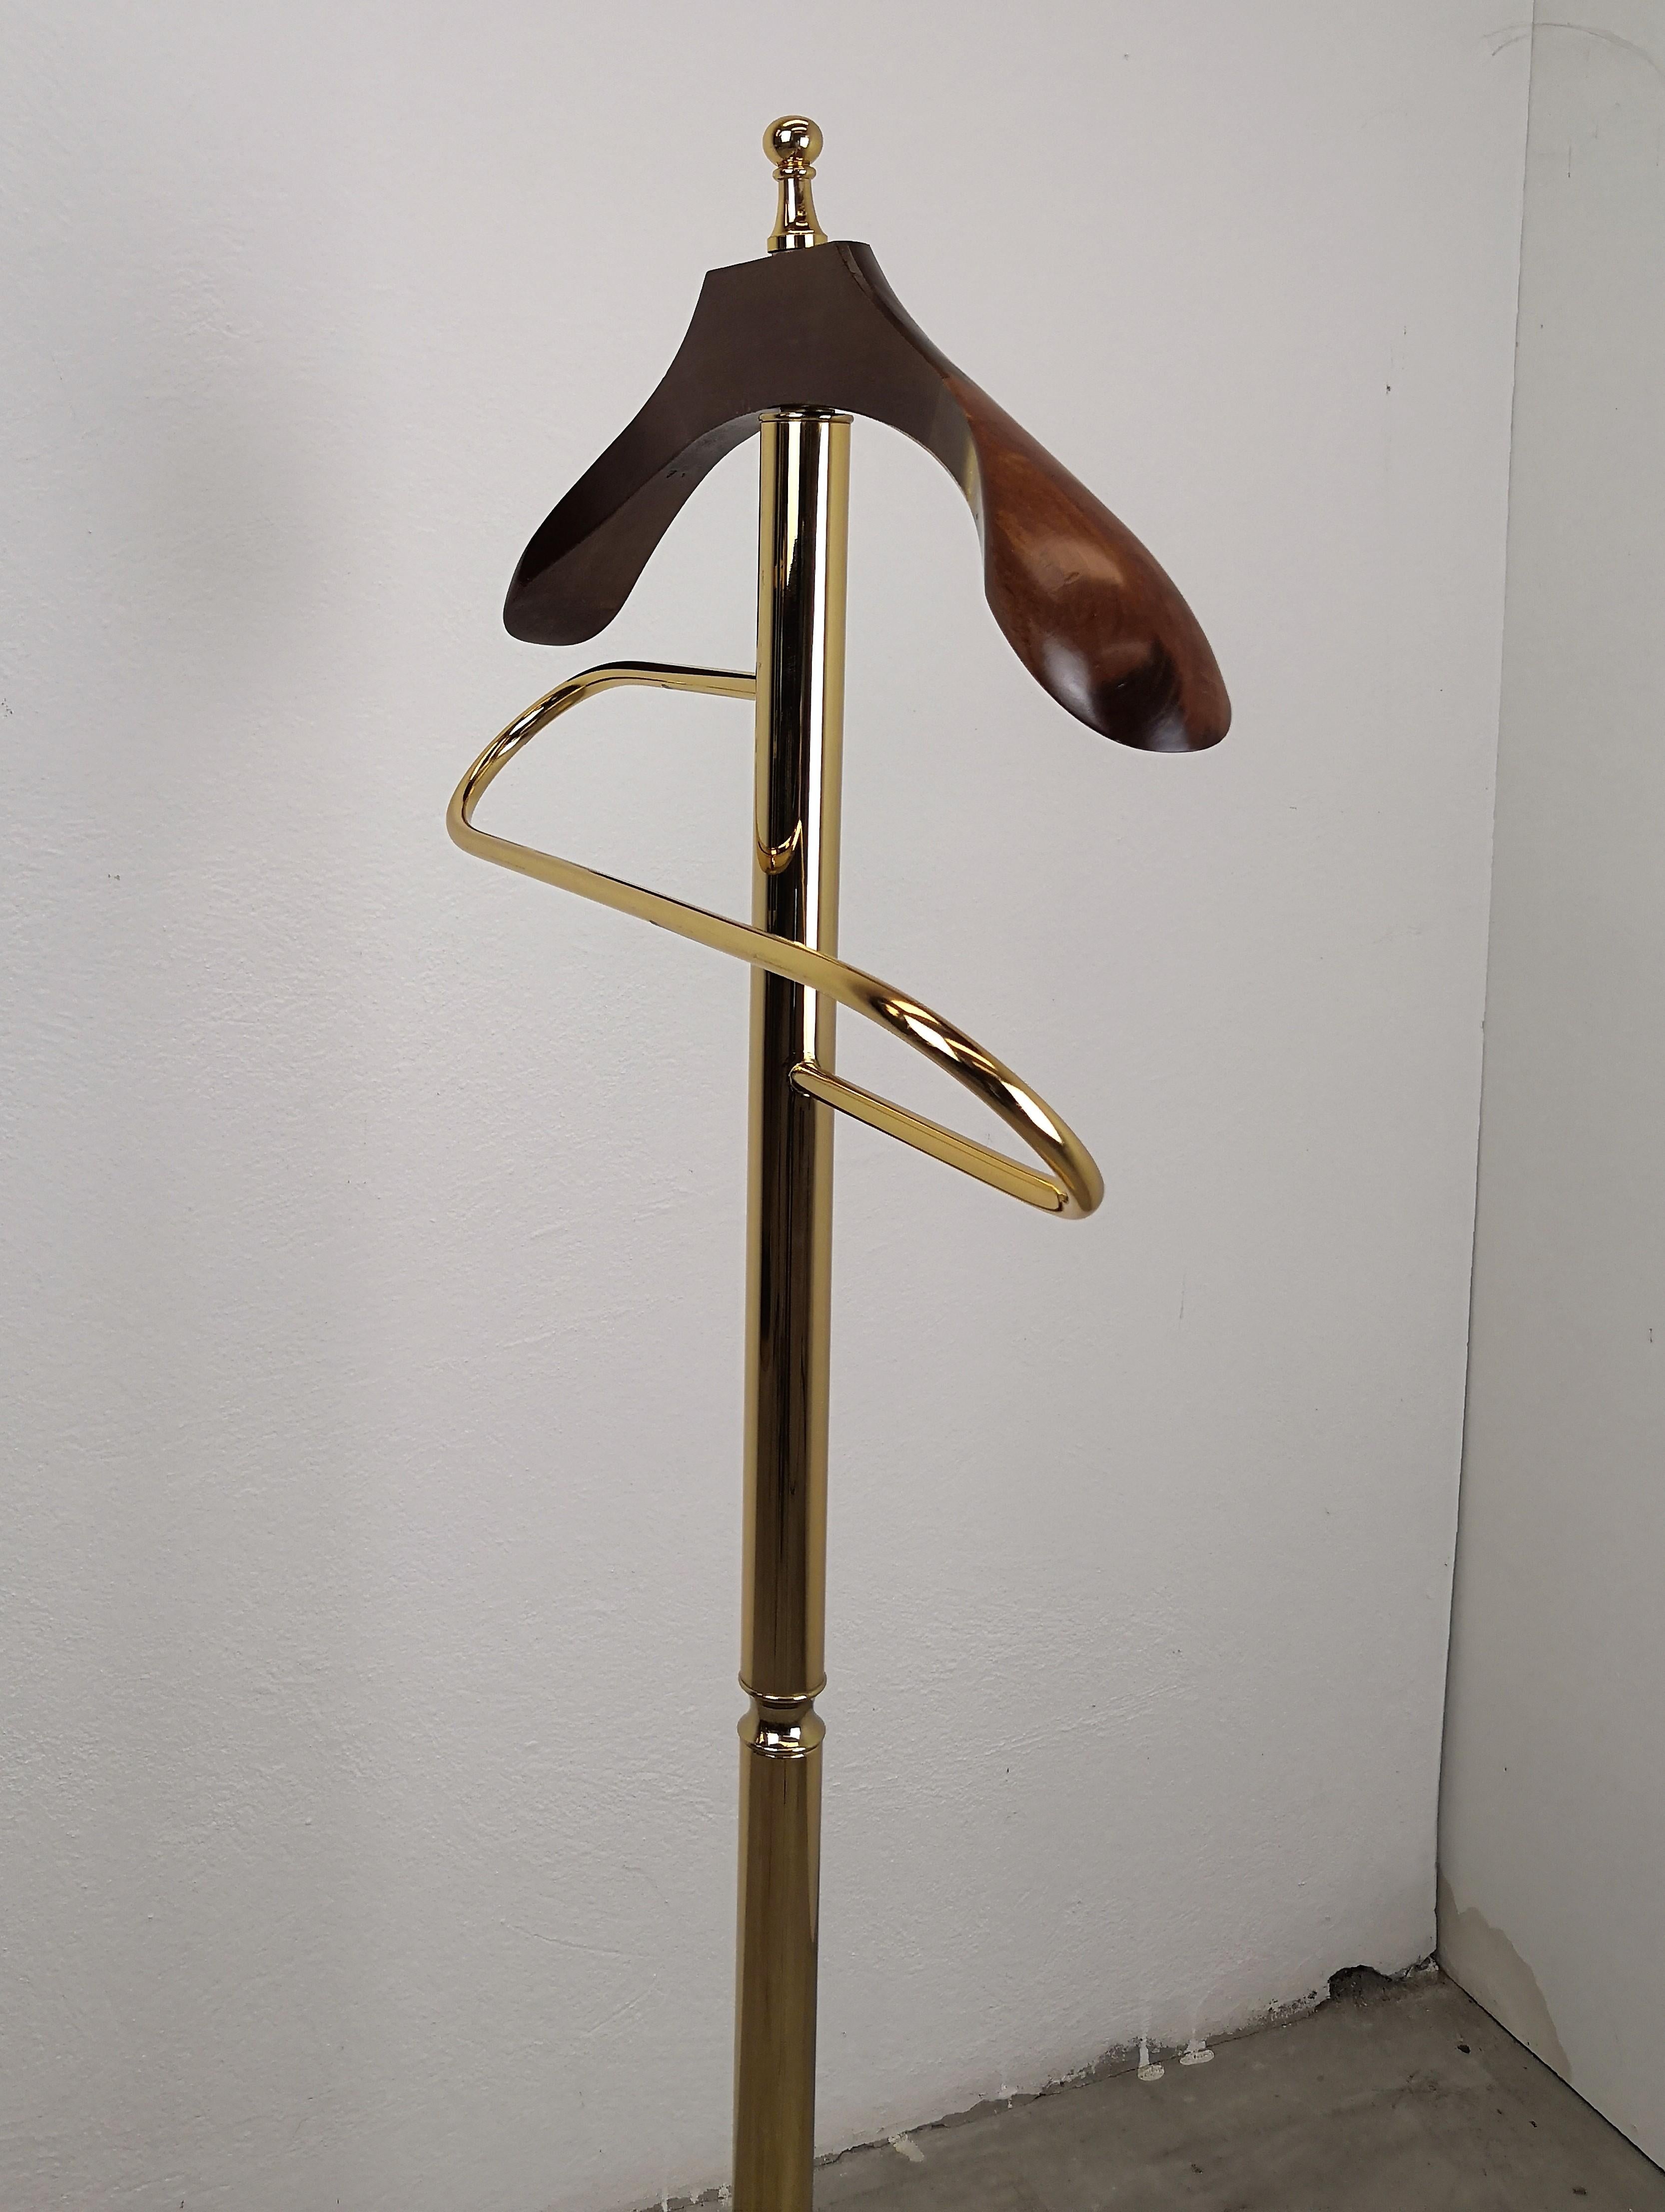 Beautiful 1970s Italian brass and wood dressboy valet stand, designed and manufactured in Italy. The valet has a wooden clothes hanger, a gorgeously shaped reling to hang pants and a marble pedestal, stand.

A great piece that perfectly adds to